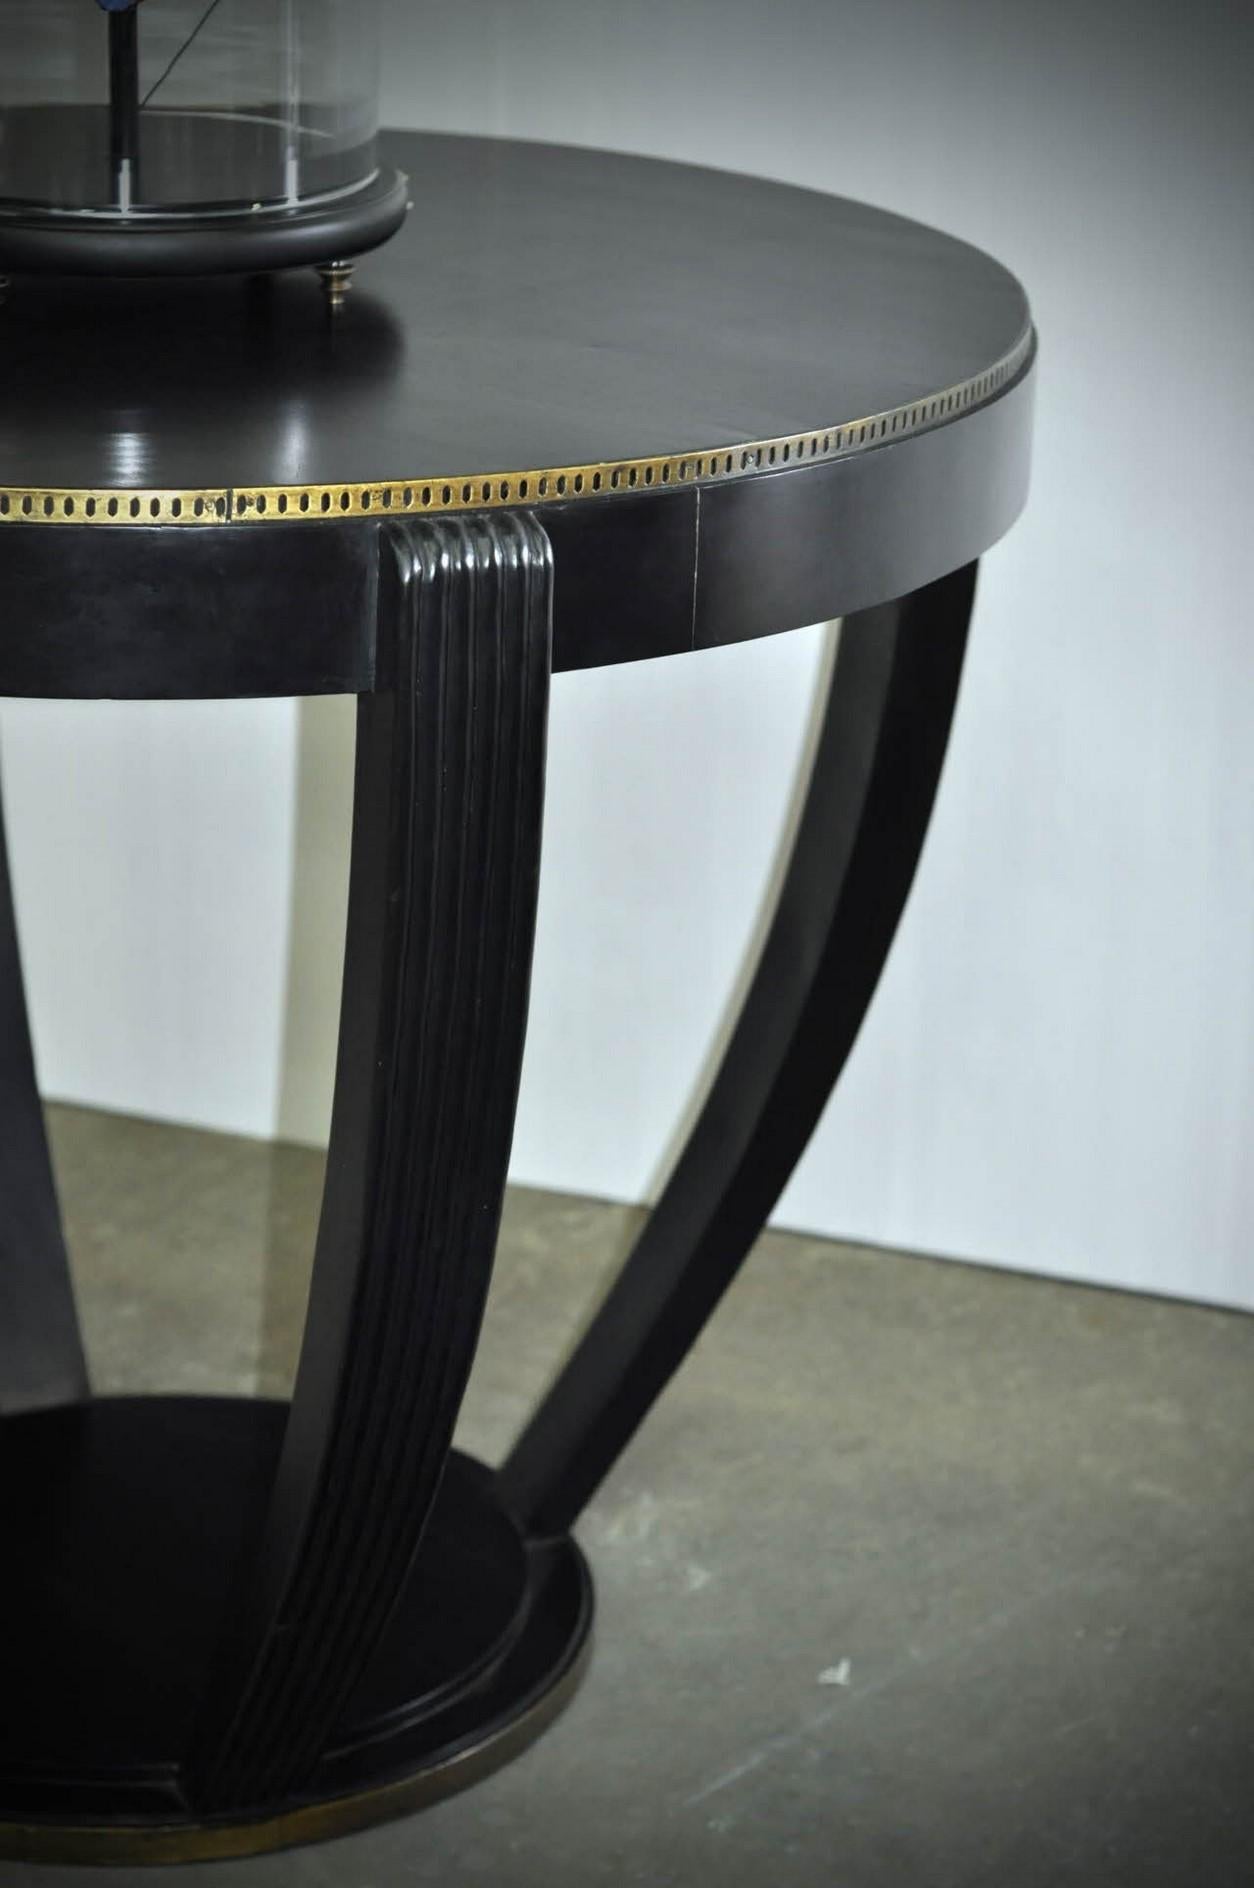 192s Art Deco design round pedestal table consisting of a graphic and geometric black wooden structure adorned with a brass inlay.